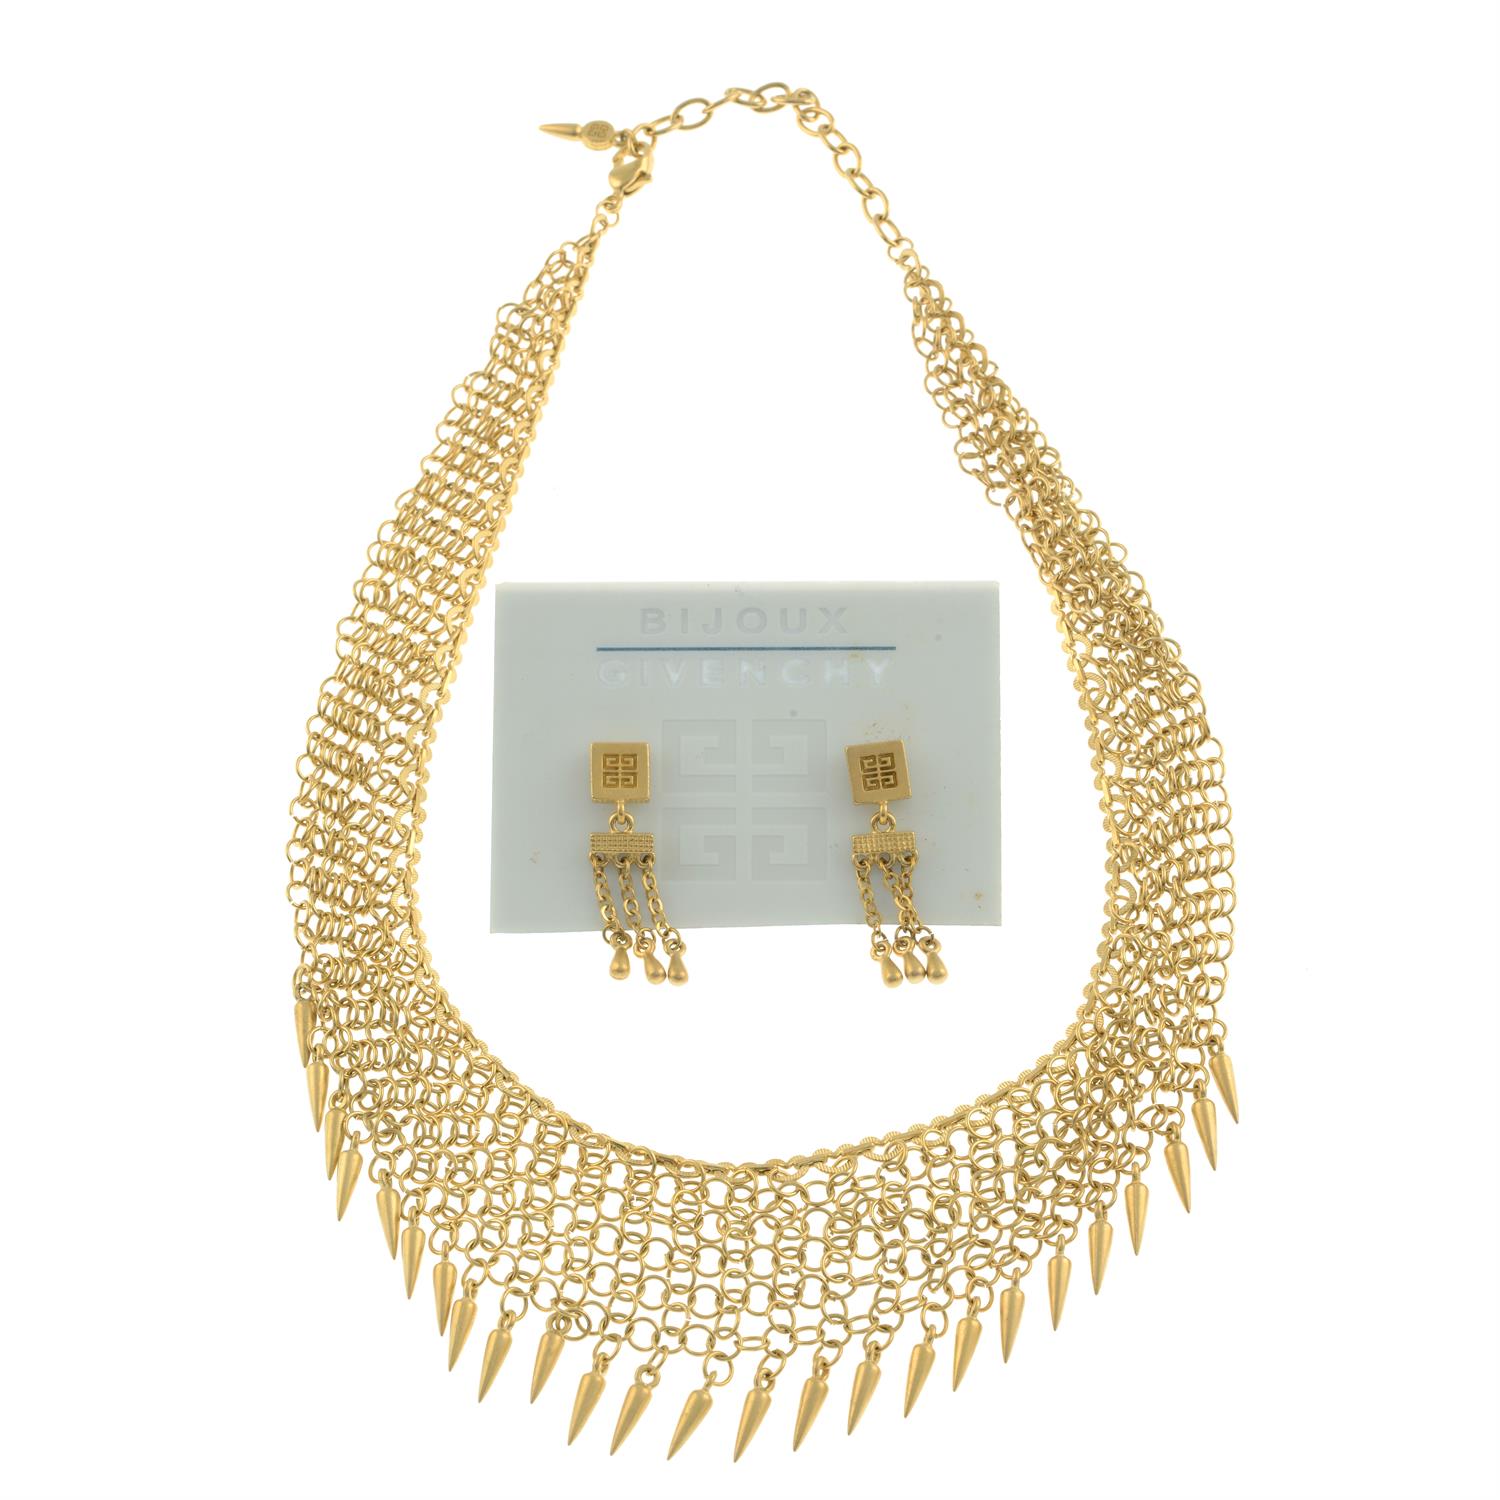 Givenchy - necklace and earring set.